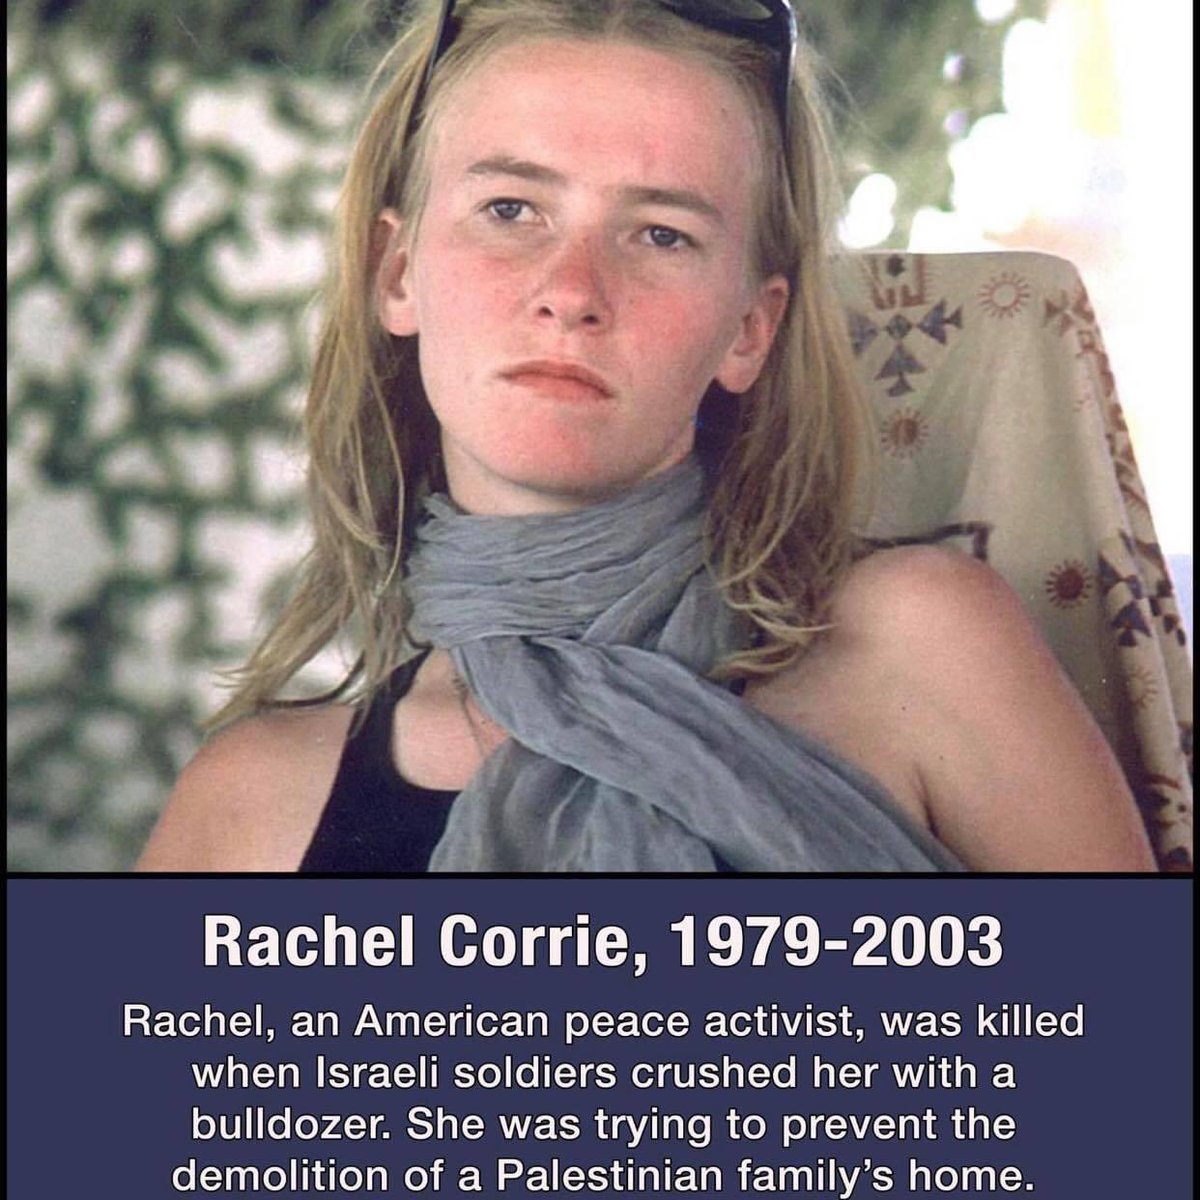 Watching these protests, you know why the US did nothing for Rachel Corrie
#FirstAmendment 
#StudentProtests